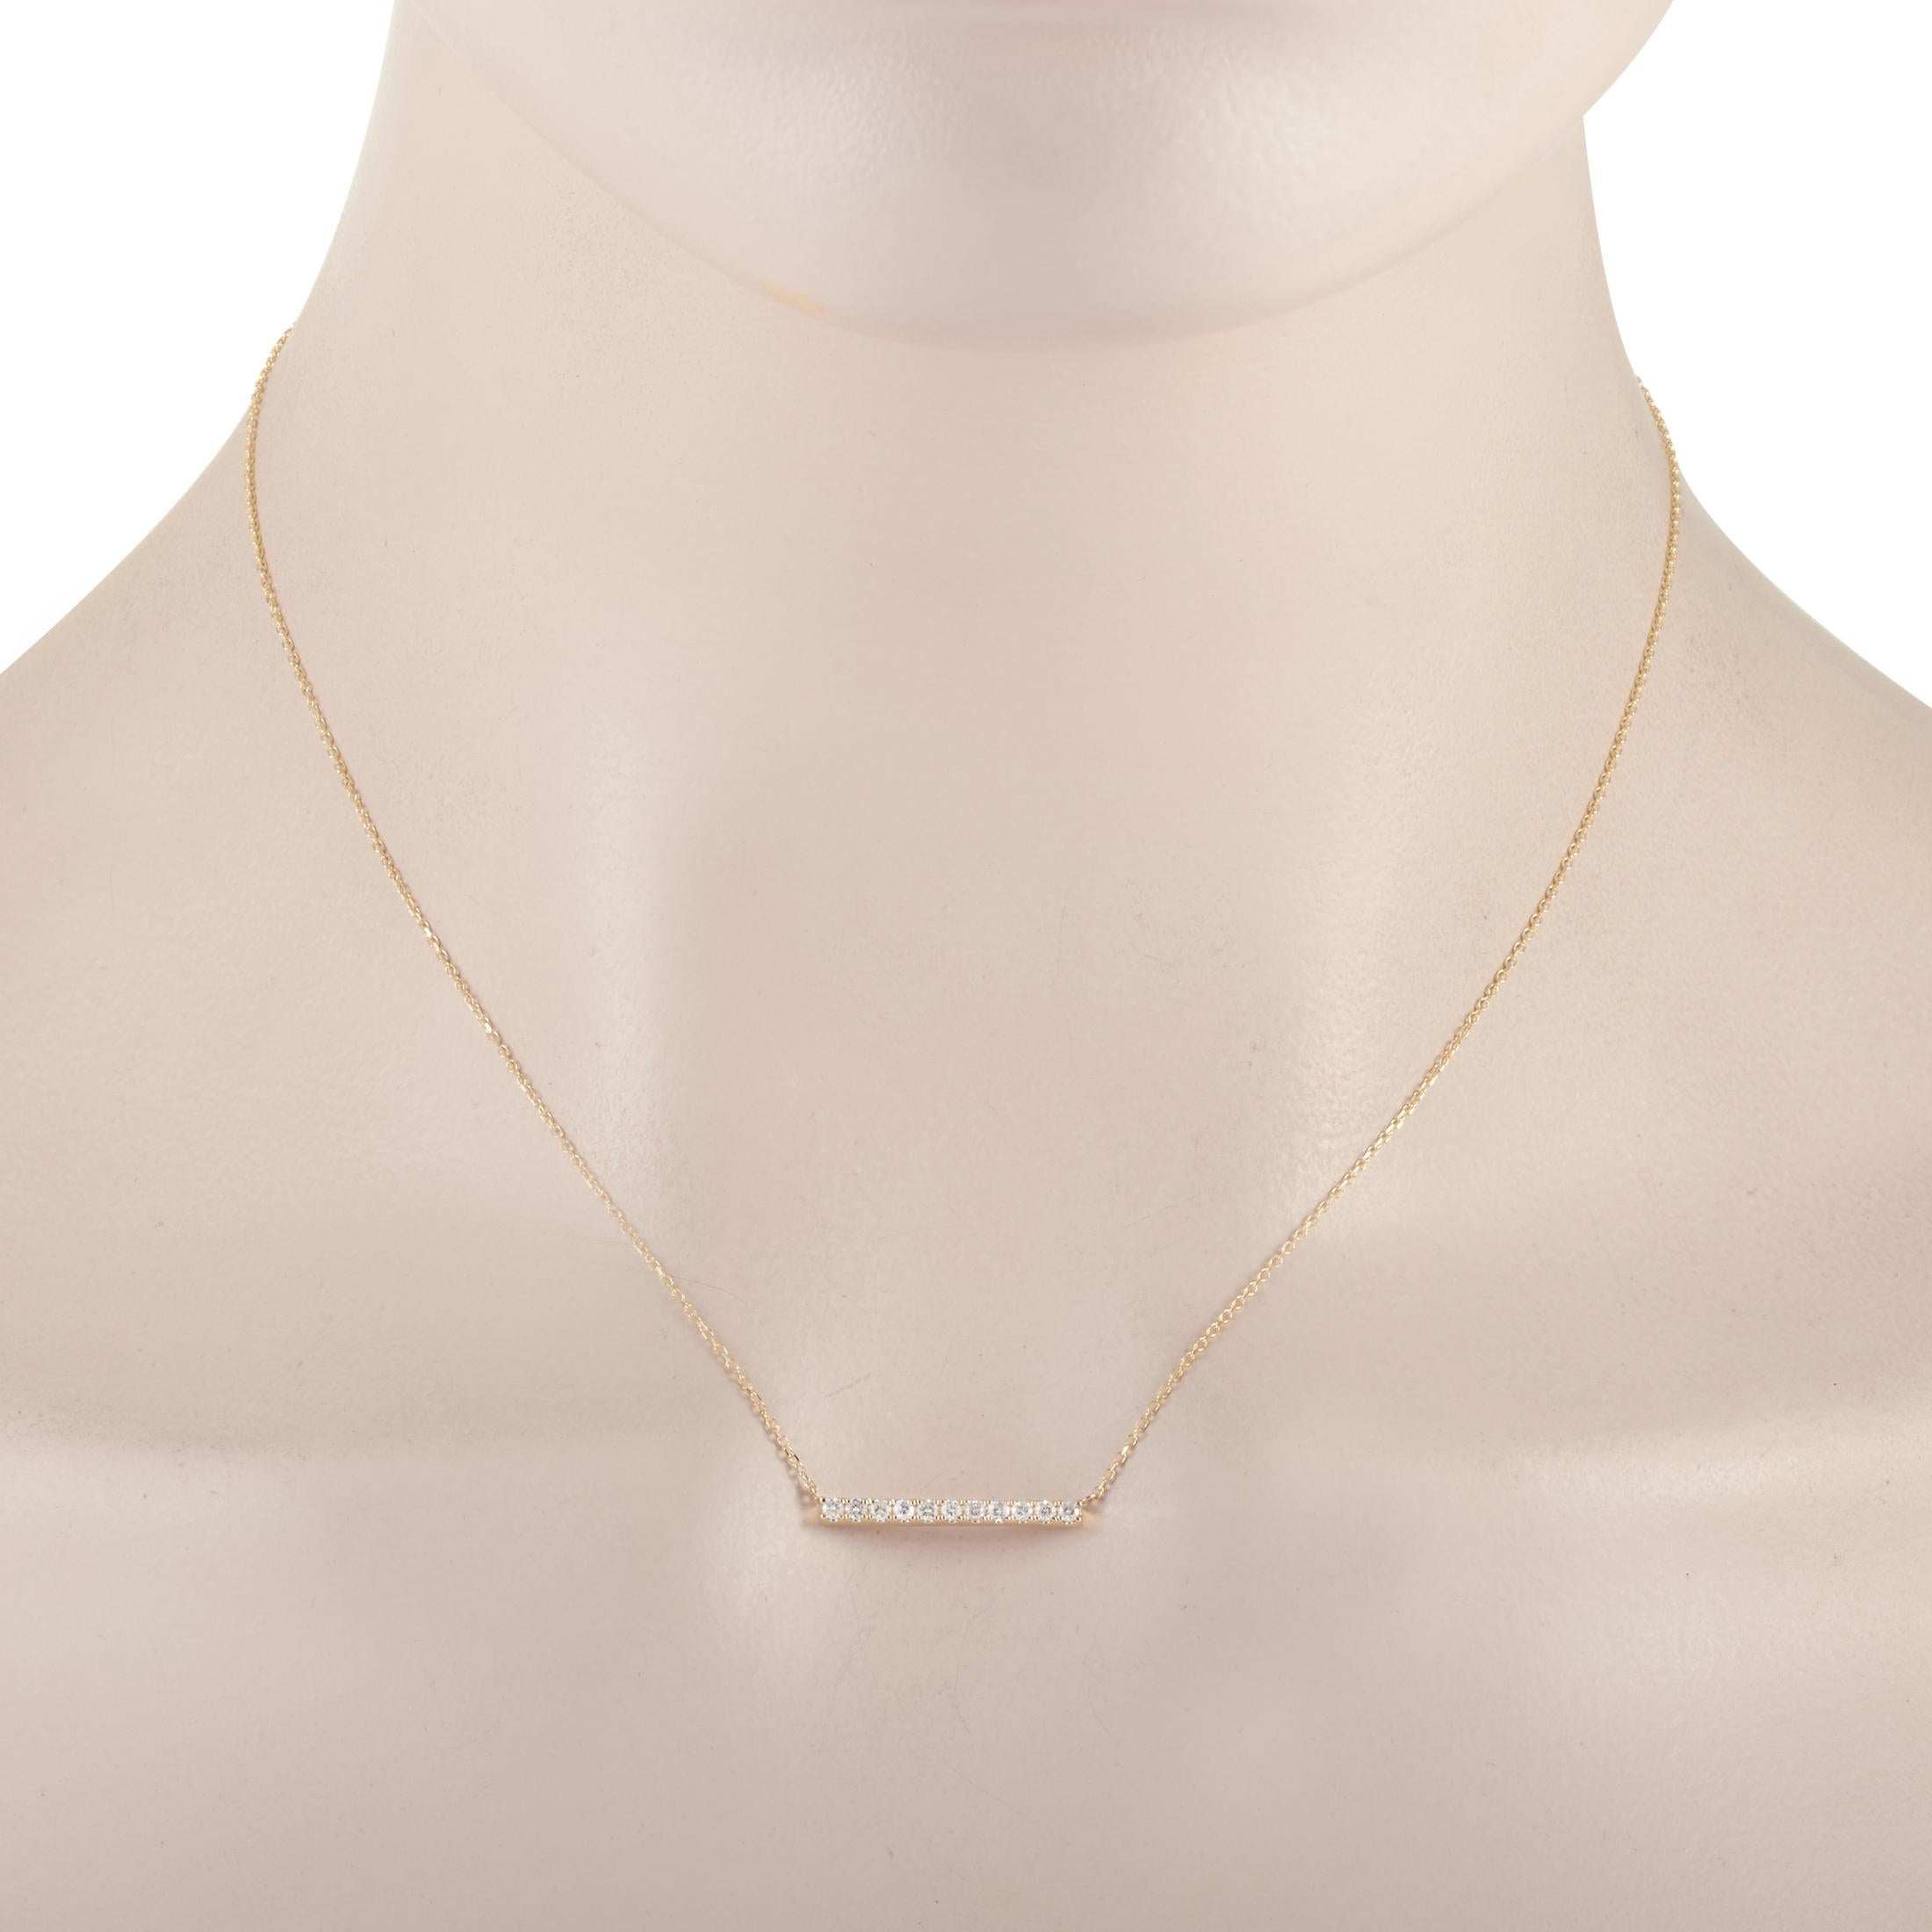 This LB Exclusive necklace is crafted from 14K yellow gold and weighs 2 grams. It is presented with a 15” chain and boasts a pendant that measures 0.07” in length and 0.75” in width. The necklace is set with diamonds that total 0.25 carats.

Offered